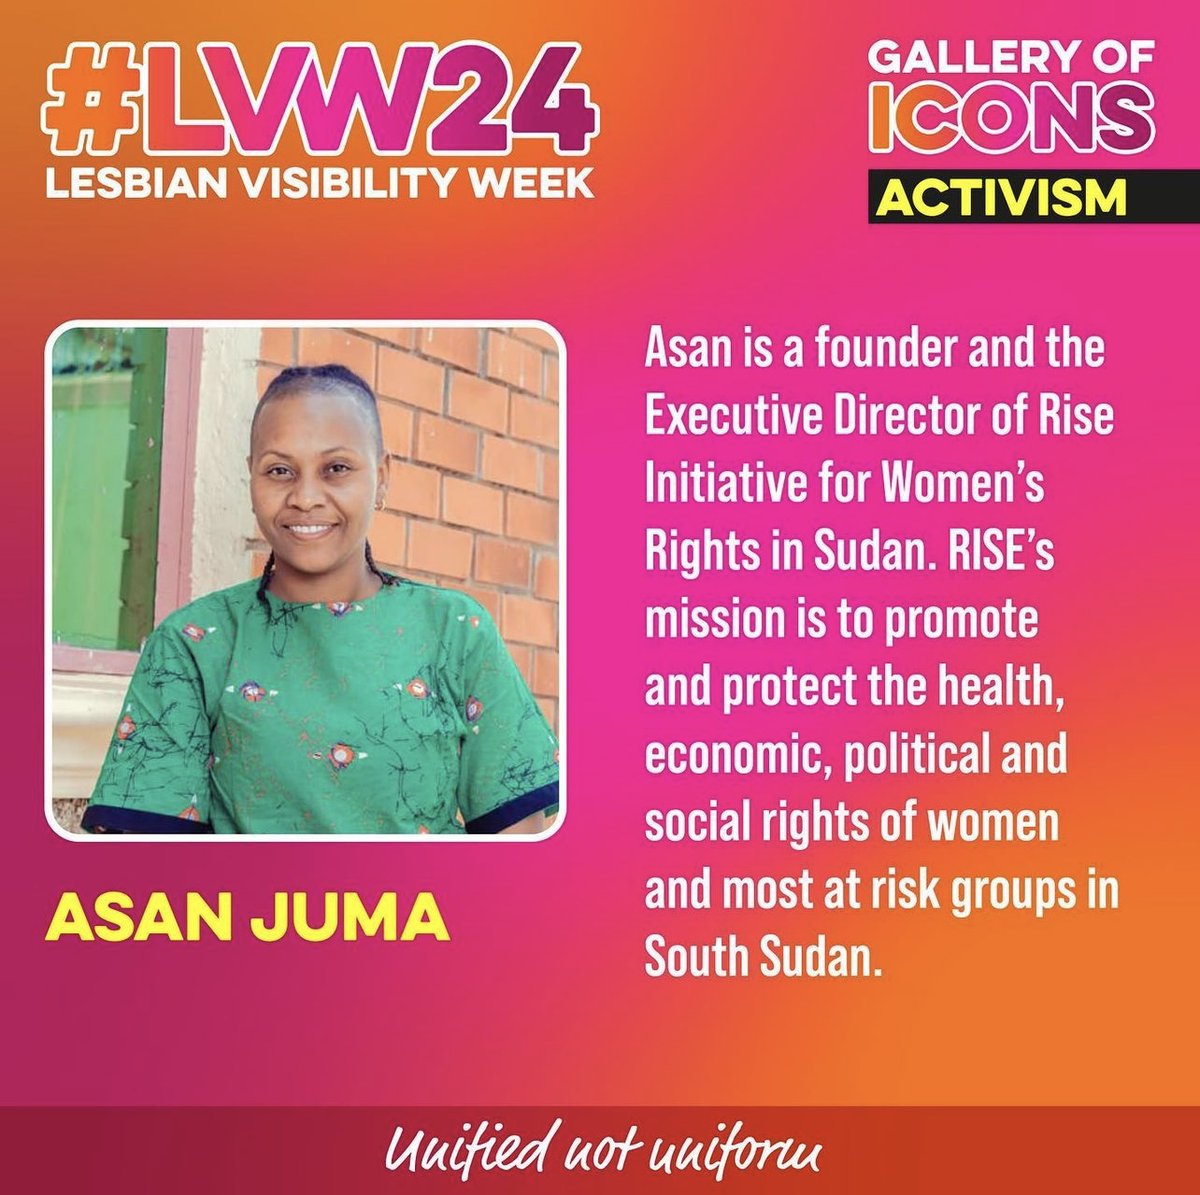 The recognitions continue! Our Executive Director, Julia Ehrt and activists from our member organisations have been featured in the @divamagazine's Lesbian Visibility Week Gallery of Icons! Read through the profiles to learn more about their work. #LVW24